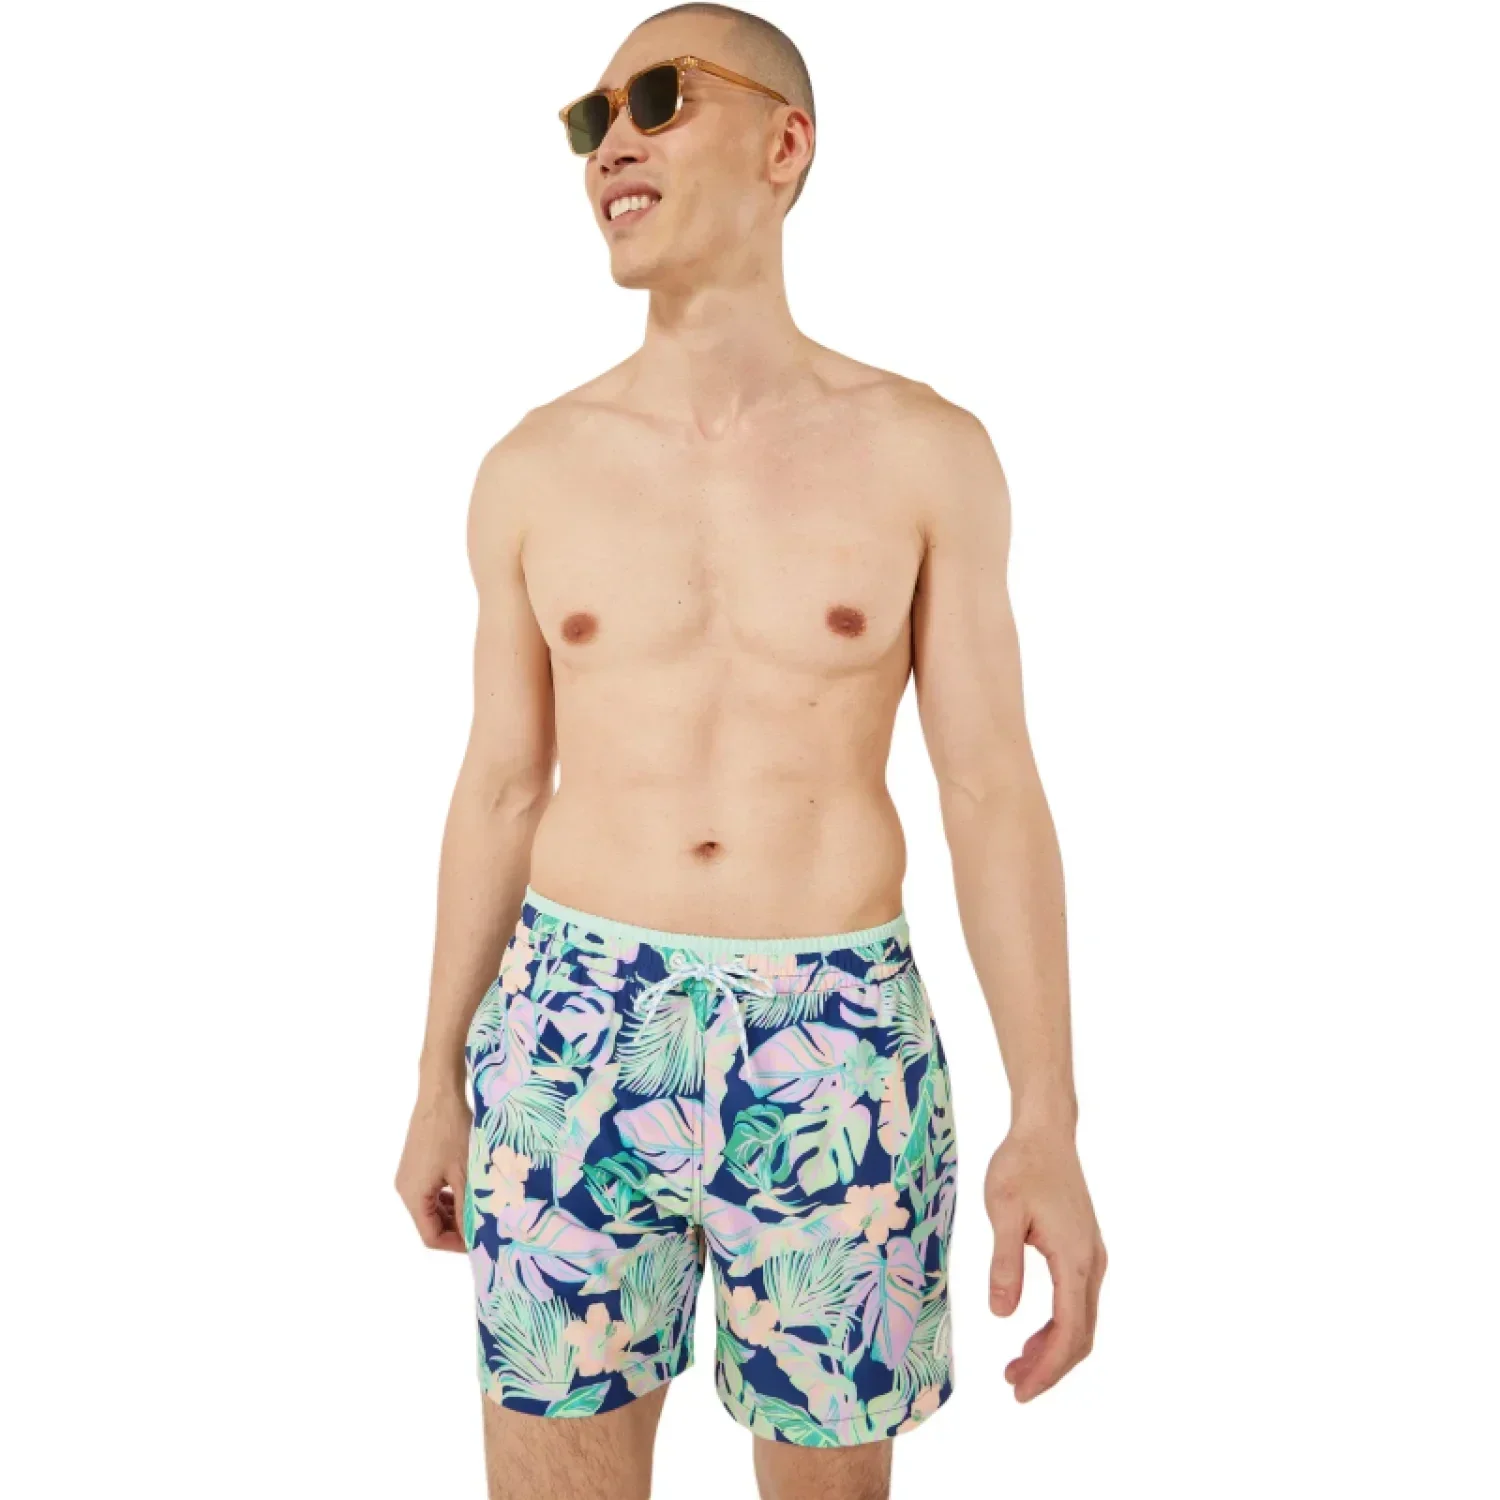 Chubbies 01. MENS APPAREL - MENS SHORTS - MENS SHORTS ACTIVE Men's The Classic Trunk - 5.5 in THE NIGHT FAUNAS